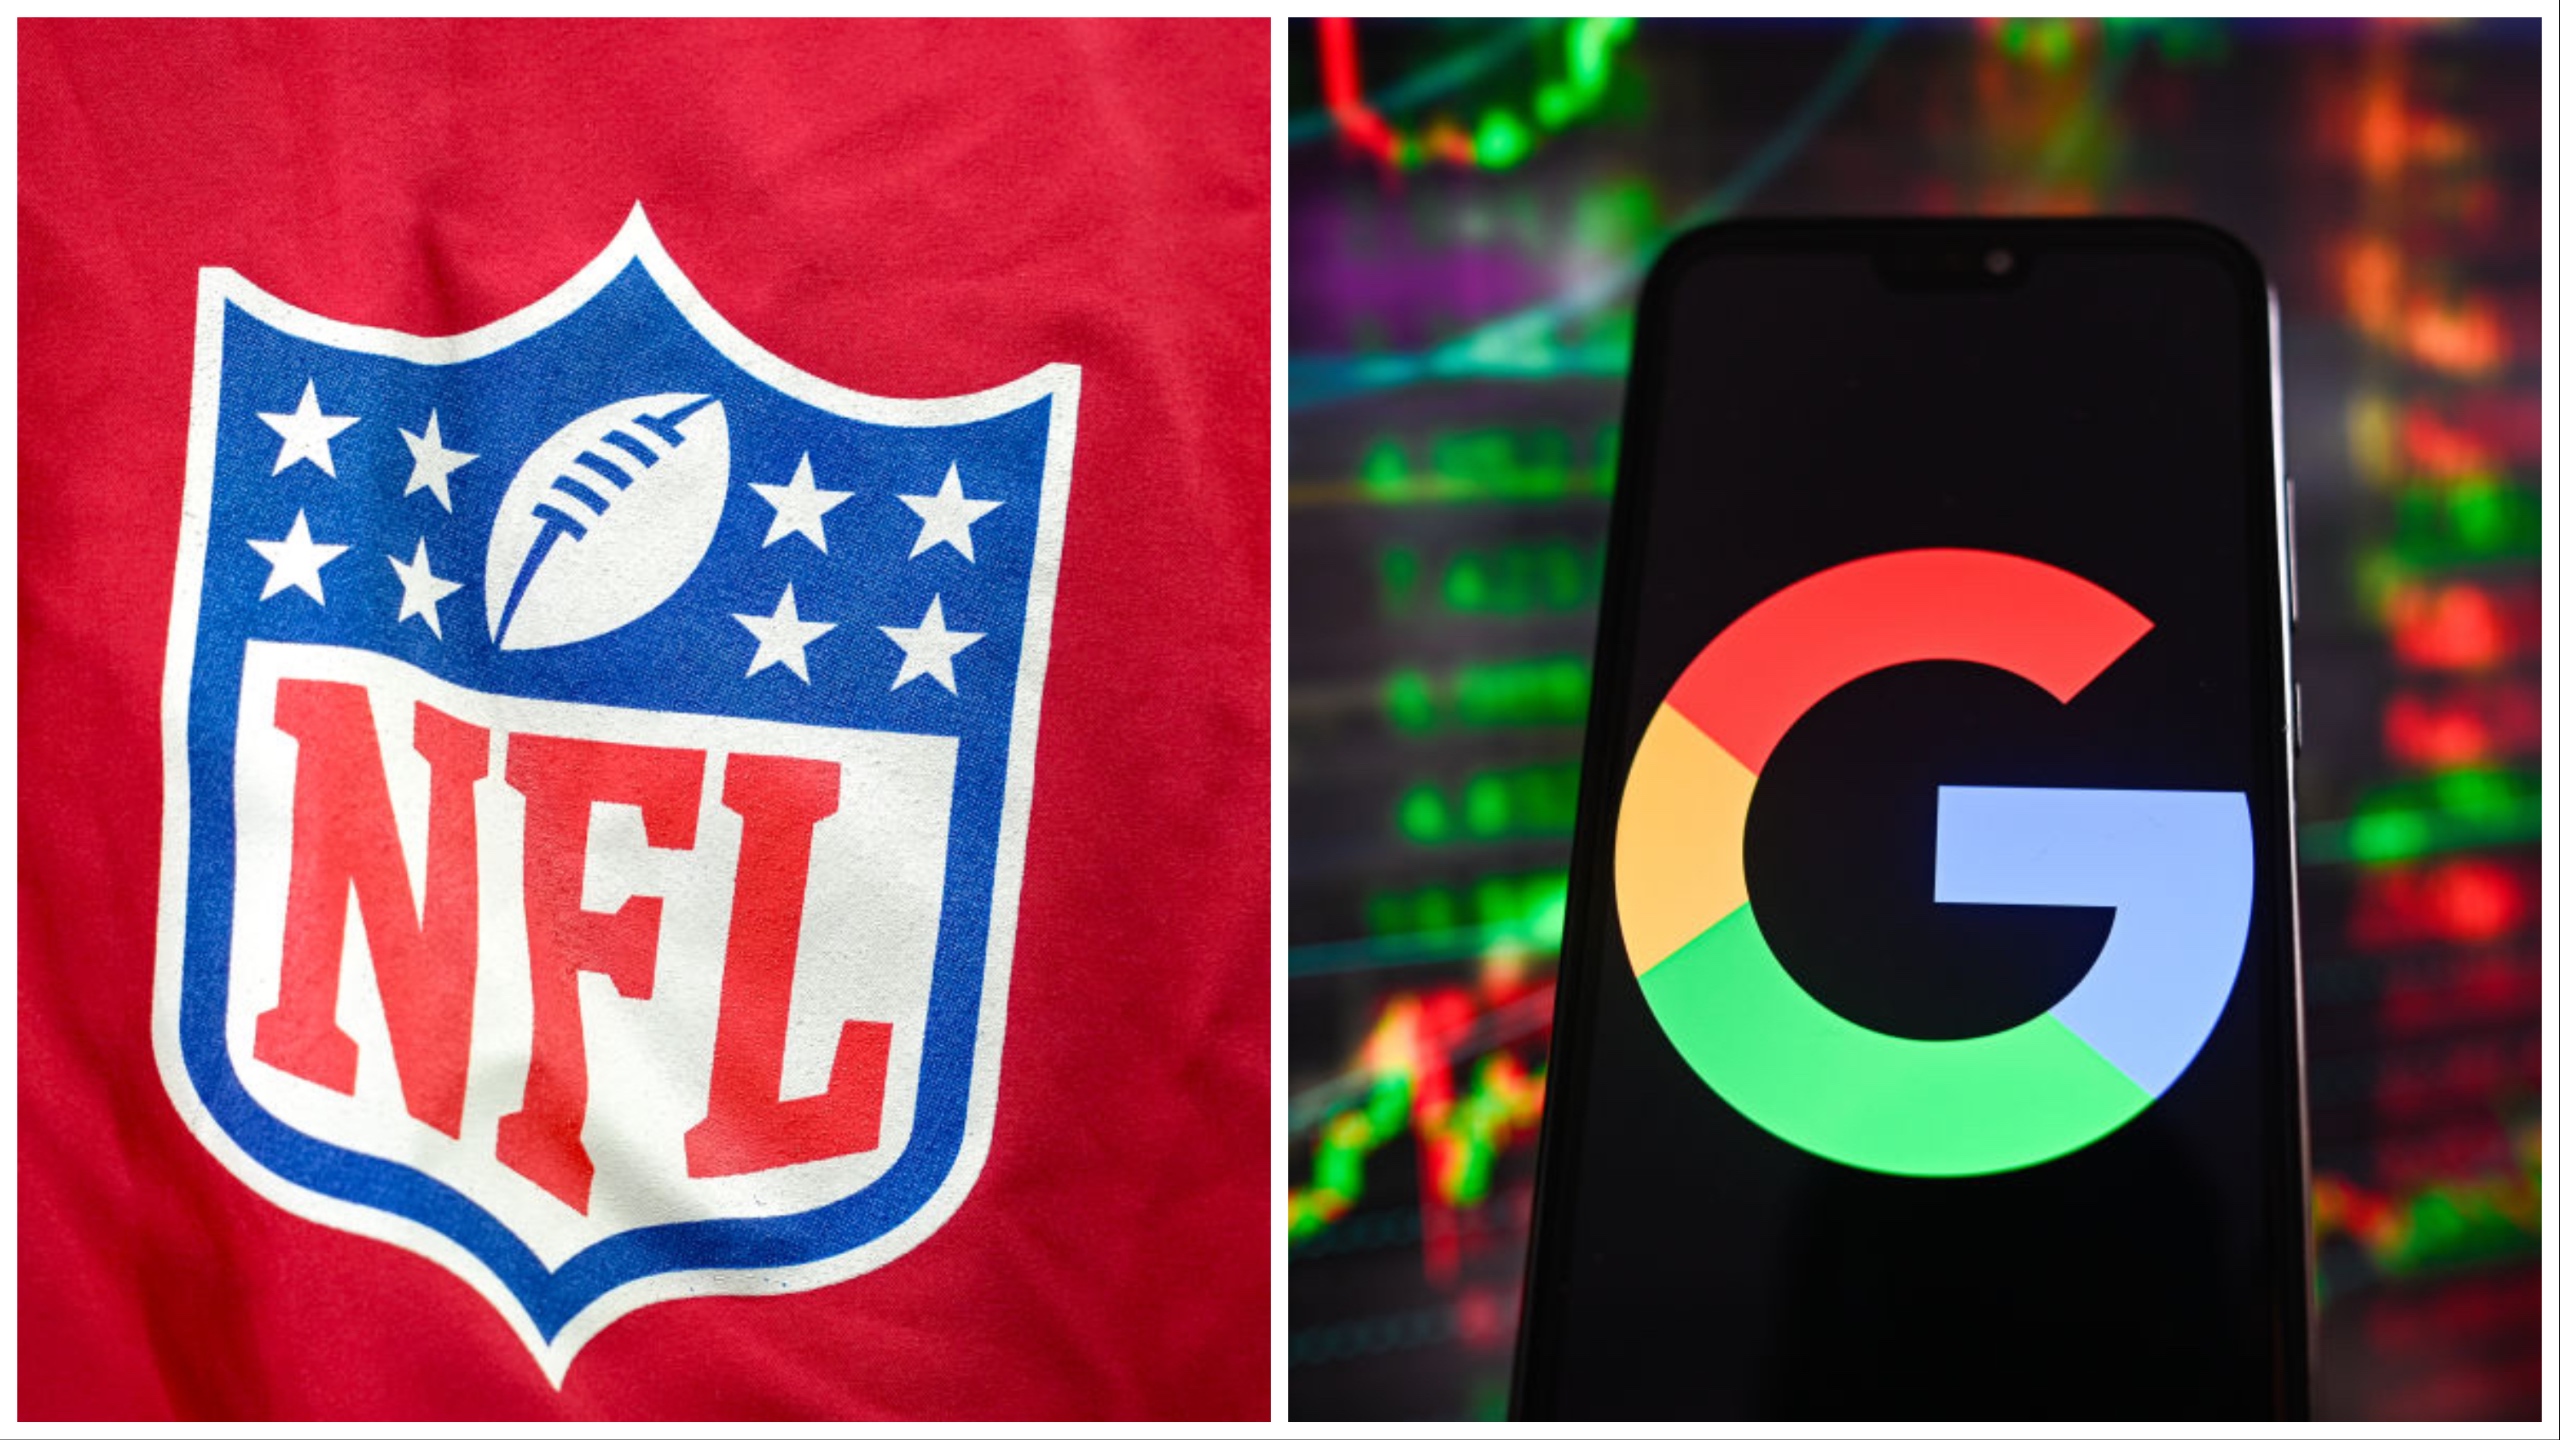 Google sued for information over rights to NFL's 'Sunday Ticket